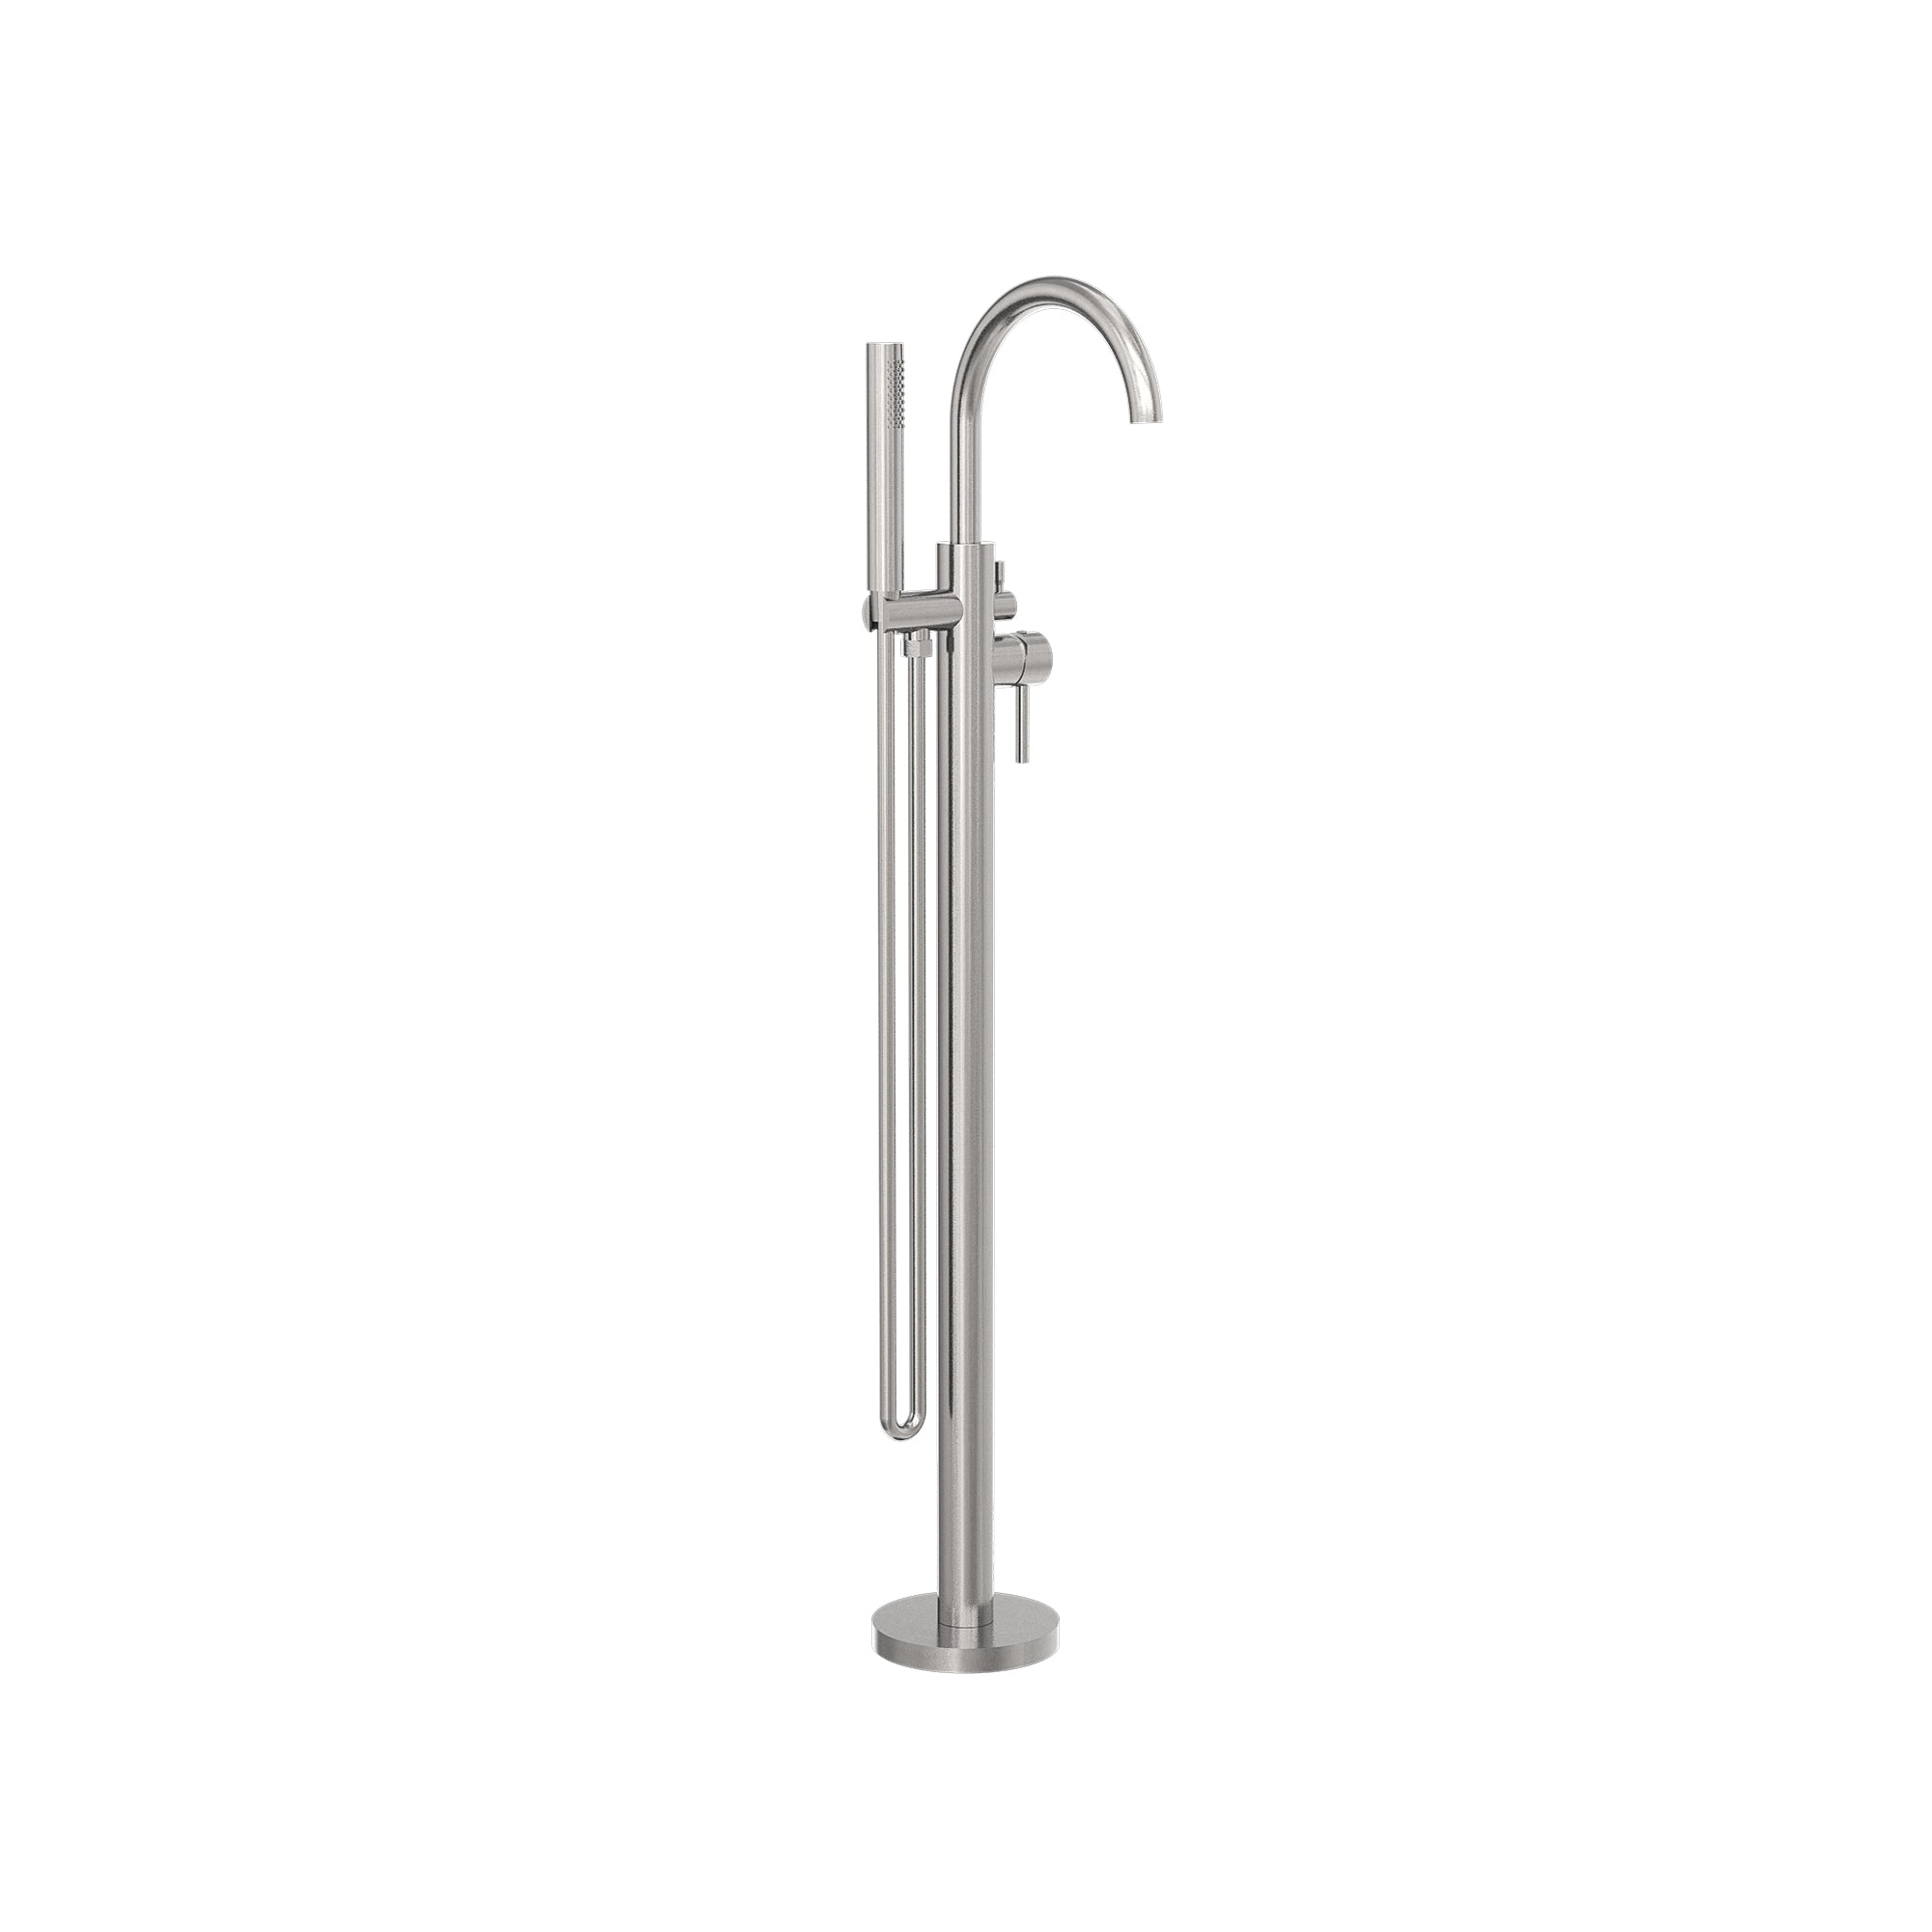 Mecca Round Freestanding Mixer With Hand Shower Brushed Nickel - NR210903aBN